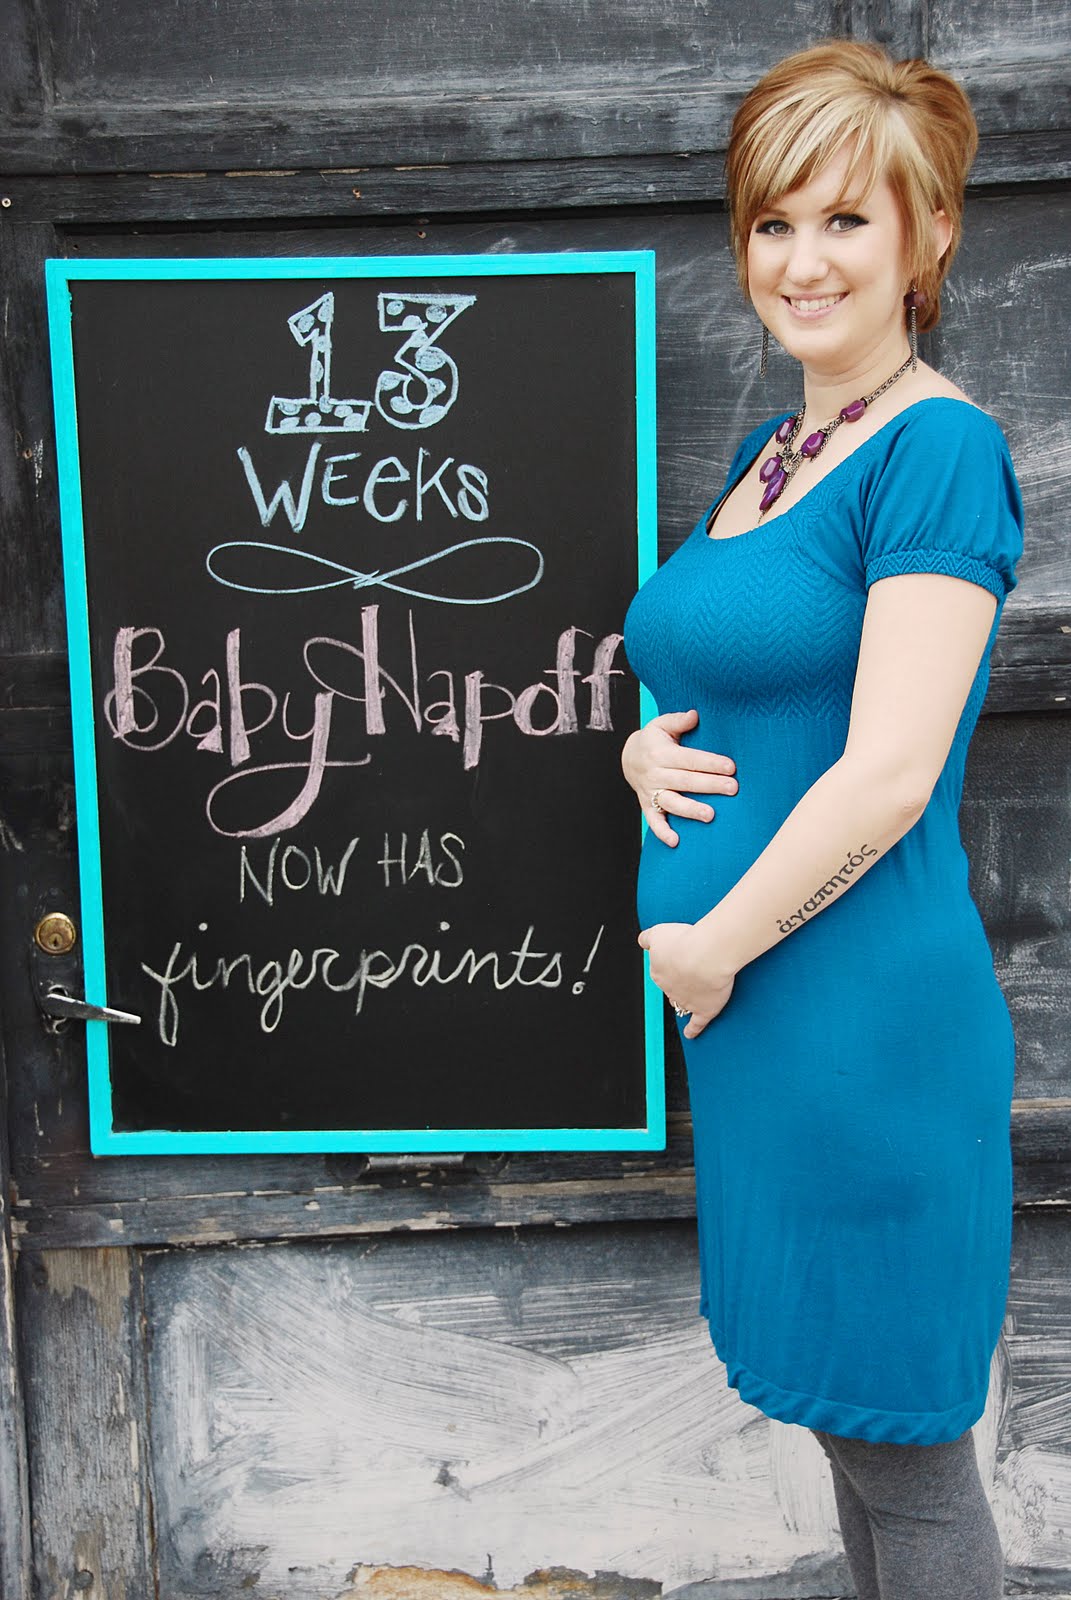 A Bushel And A Peck 13 Weeks And Funny Happenings